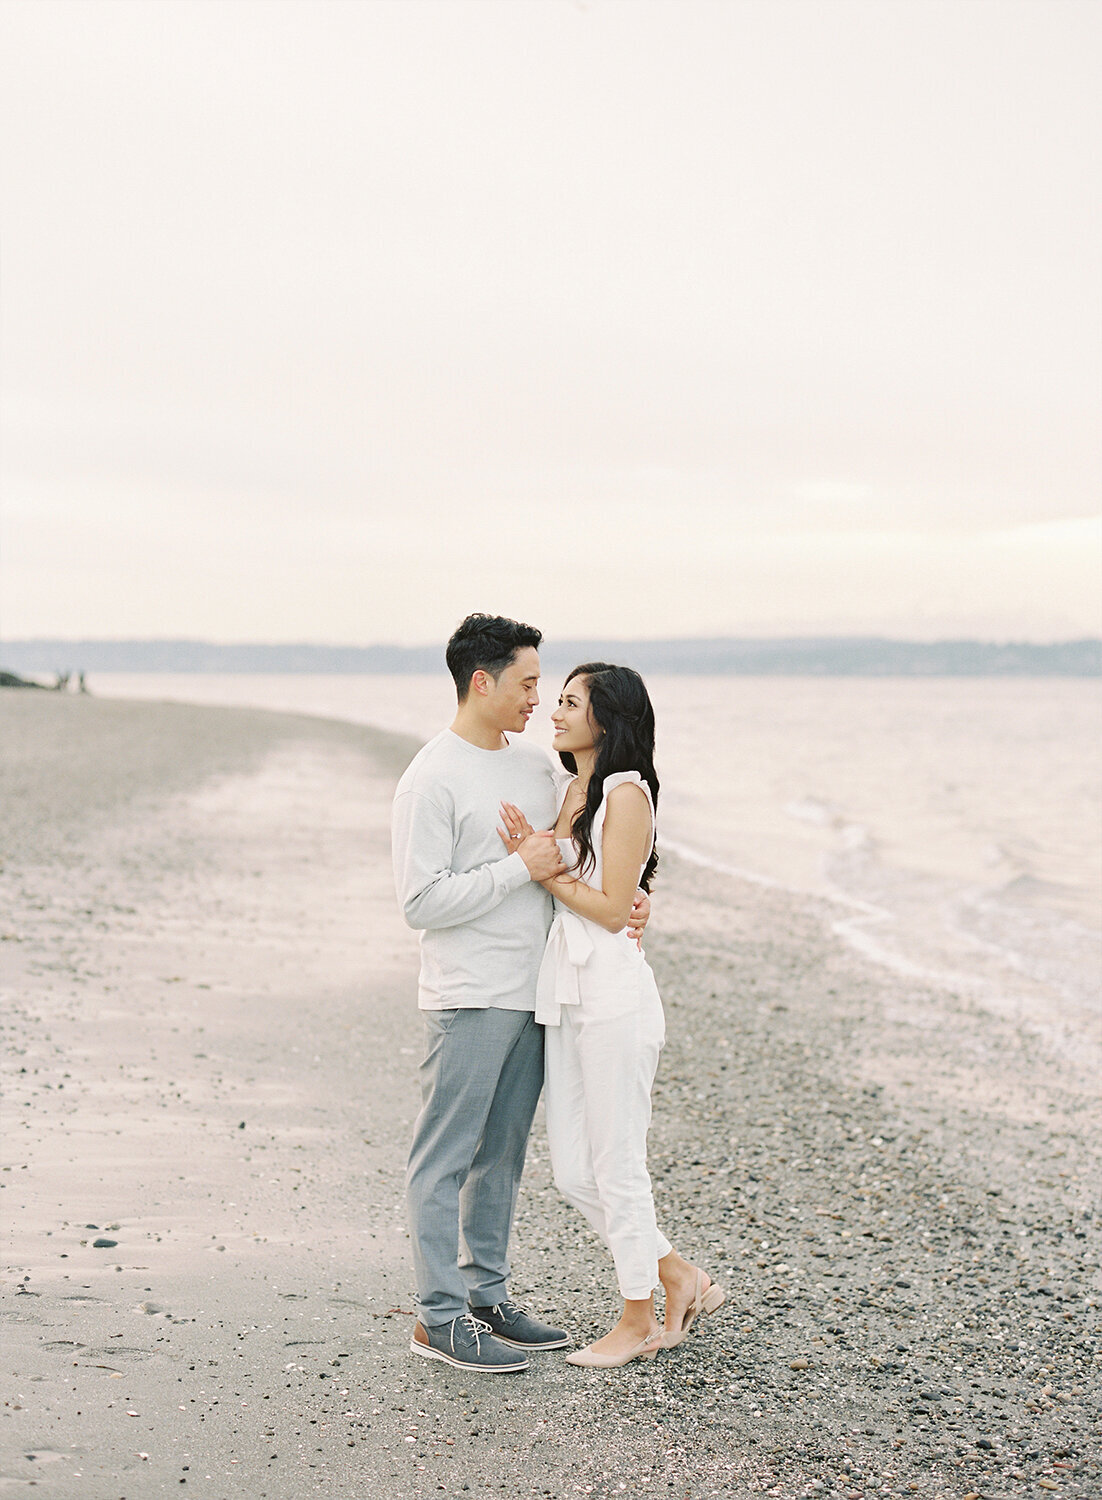 Seattle City Engagement Session on Film - Tetiana Photography - D&AJ - 20